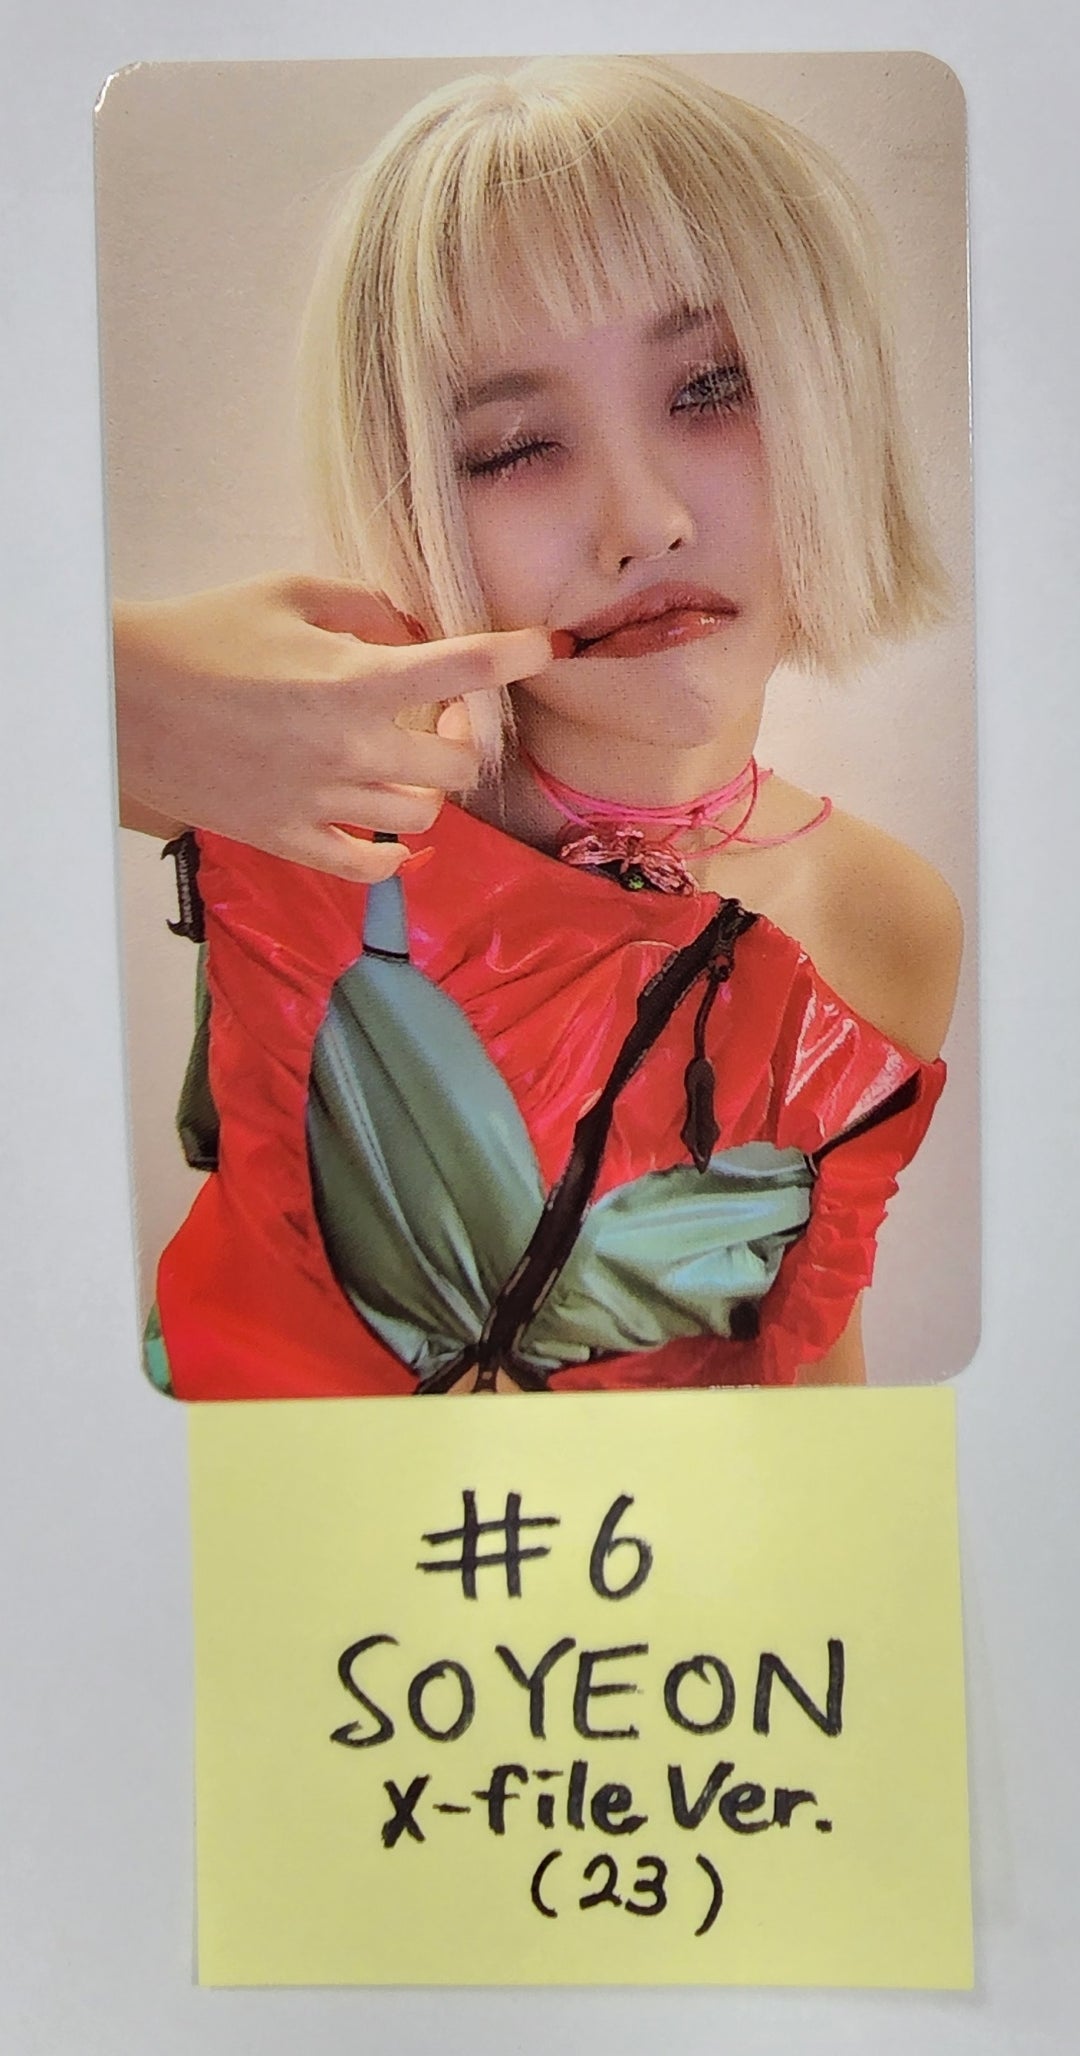 (g) I-DLE "I LOVE" - Official Photocard